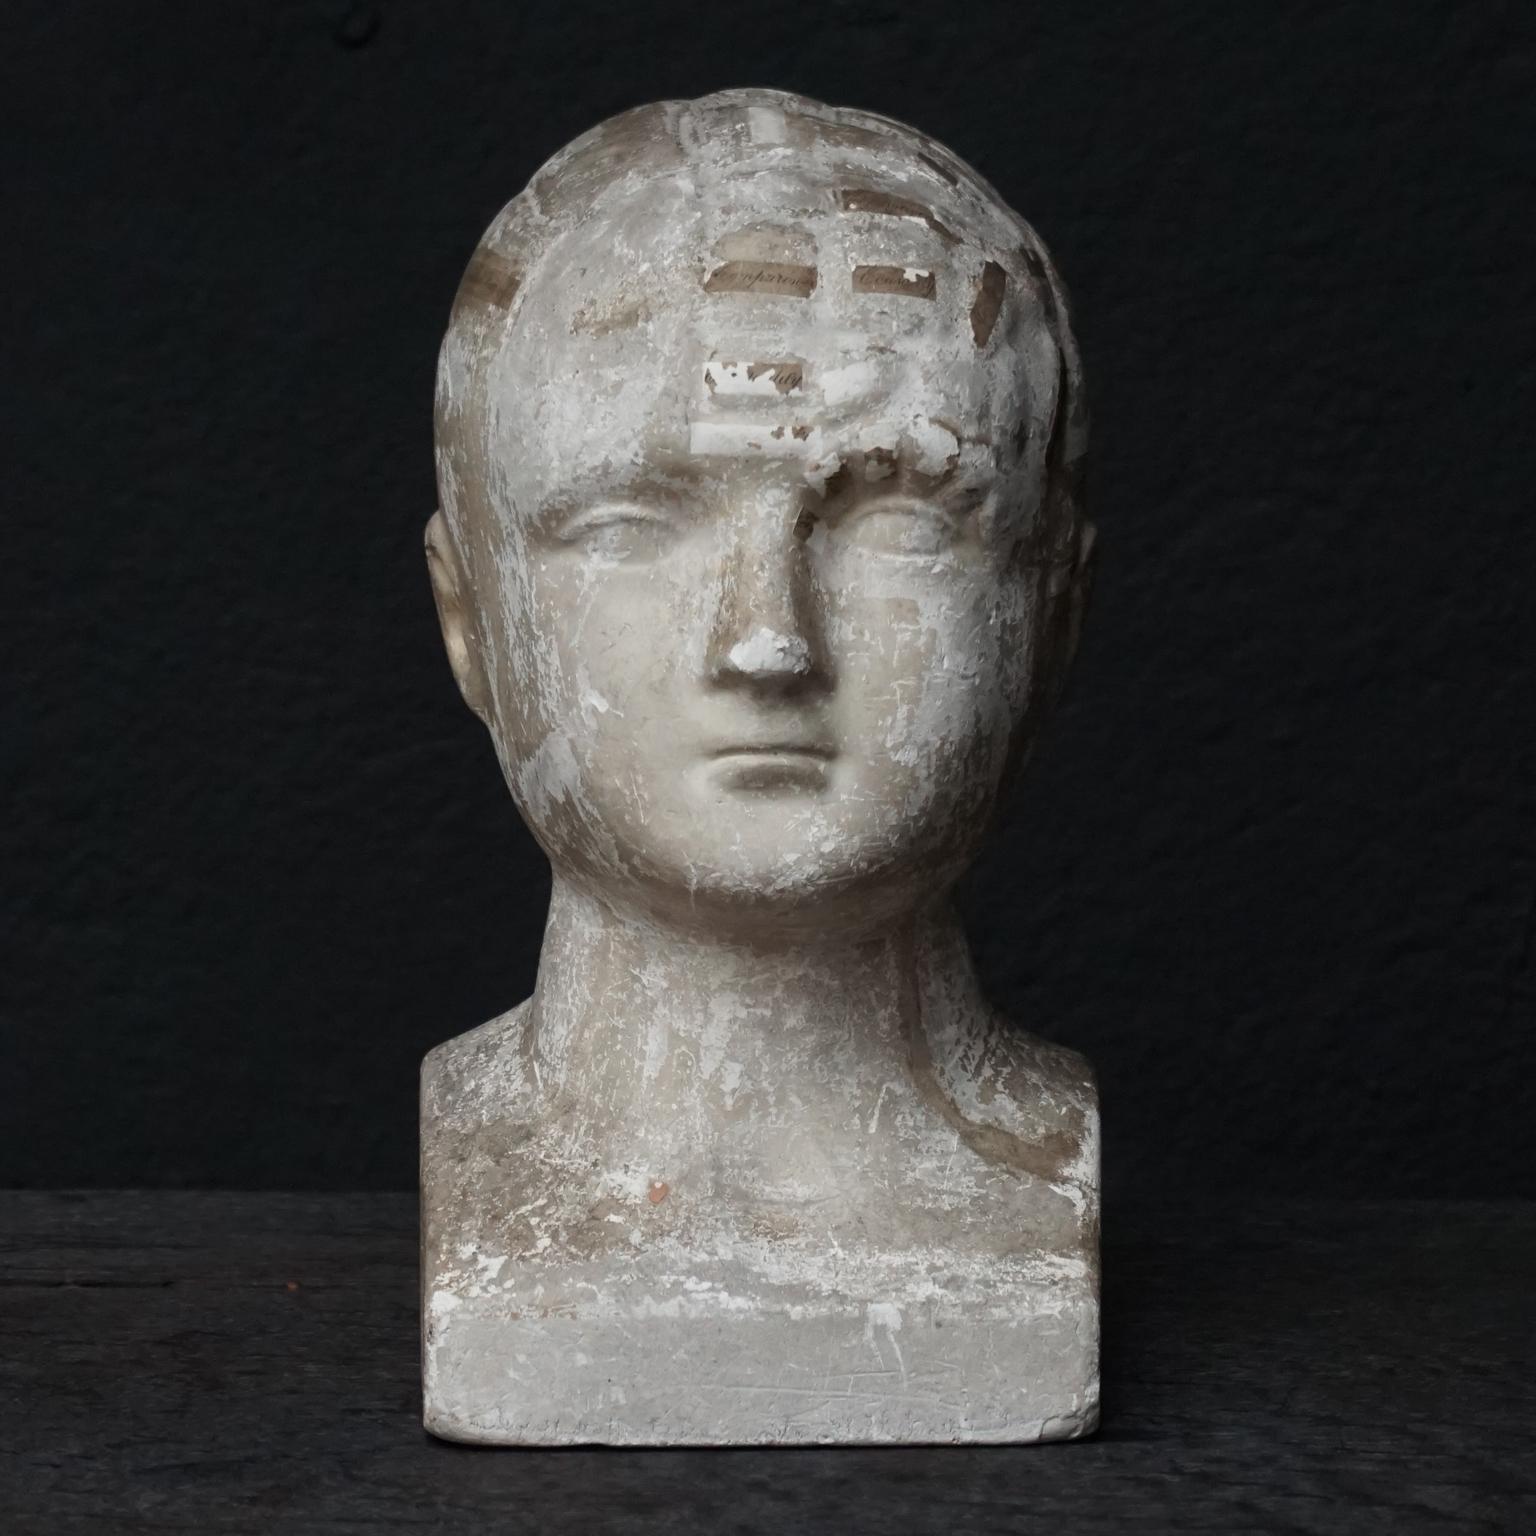 Rare and original 19th century American phrenological chalk-ware or stucco head/bust, with sections of the brain labeled with printed paper, by Fowlers & Wells Phrenological Cabinet New York.

Phrenology was the study of the shape and features of